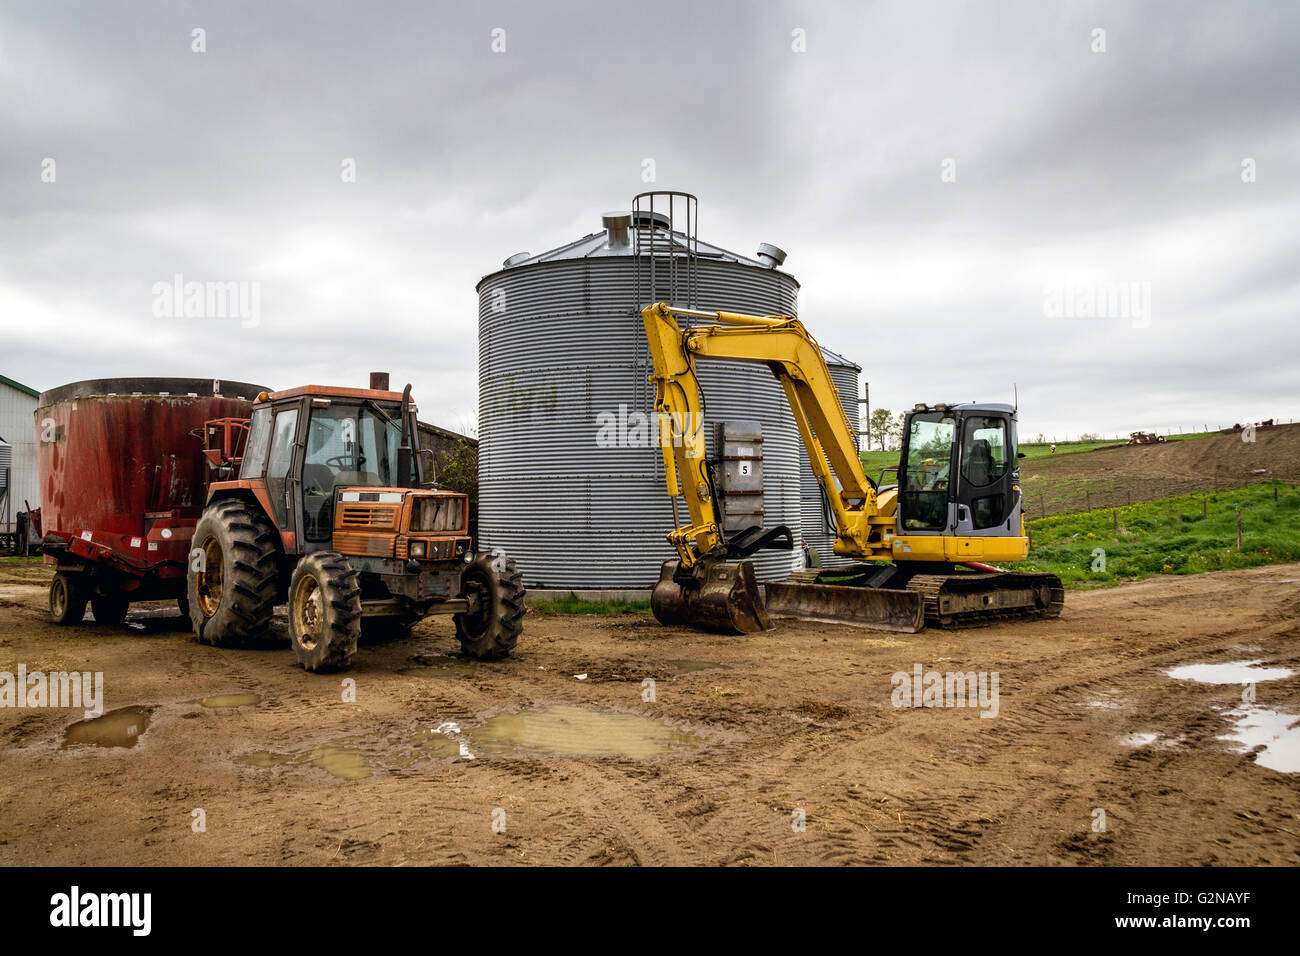 farming tractor and excavator in front of a silo Stock Photo